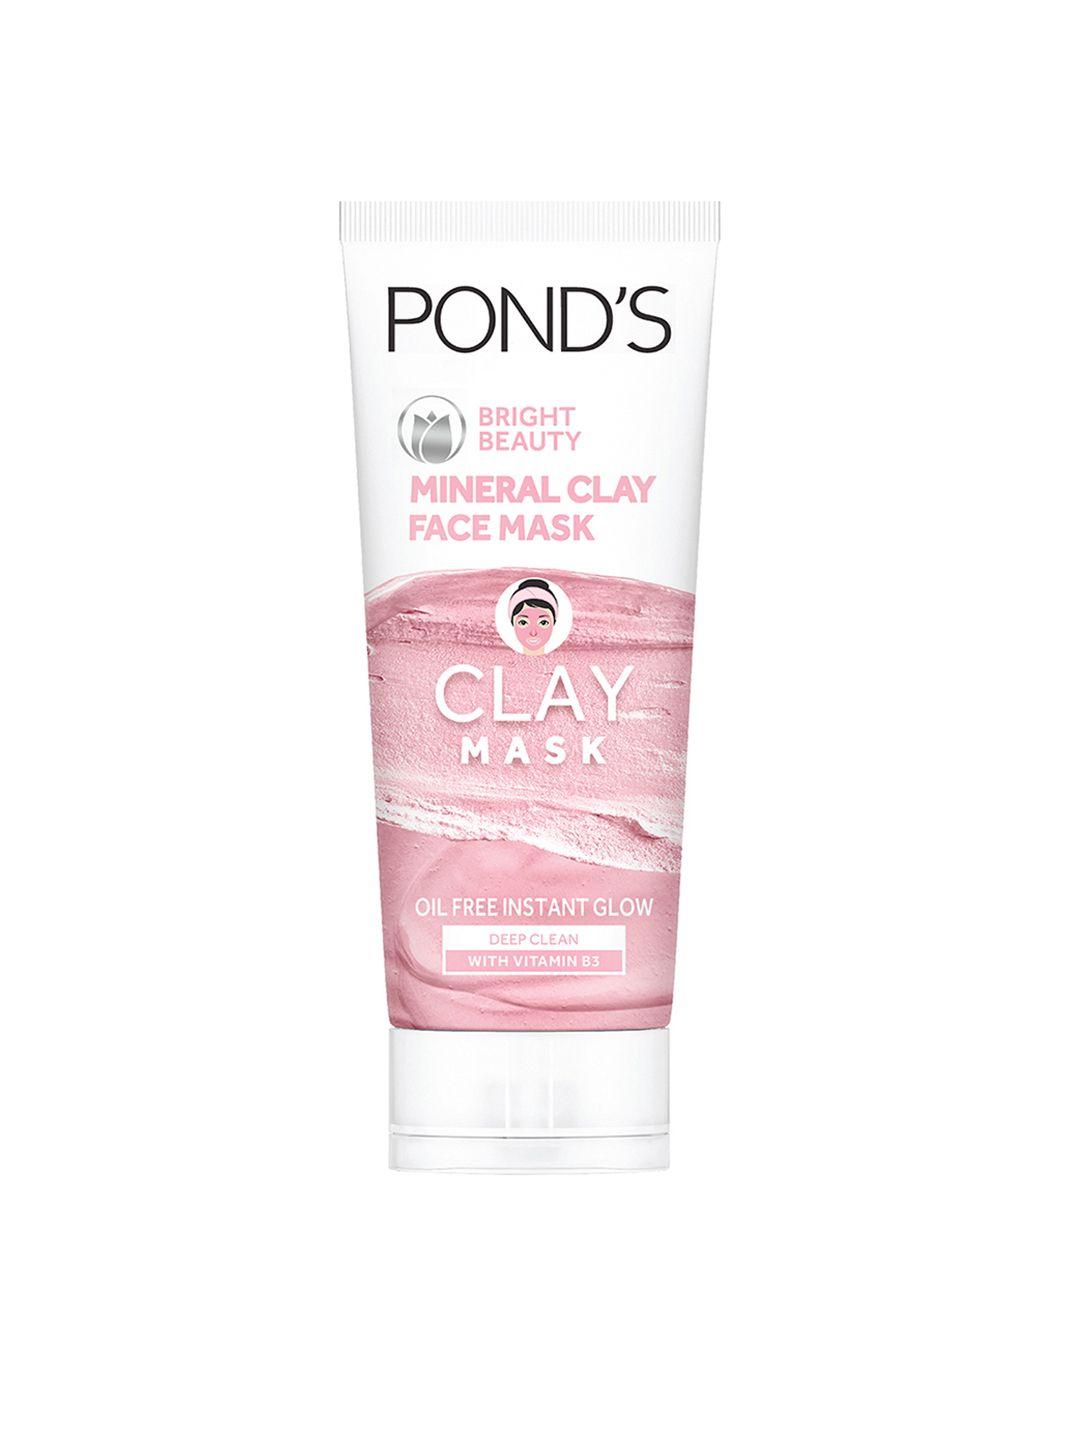 ponds-bright-beauty-mineral-clay-face-mask-for-oil-free-instant-glow---90-g